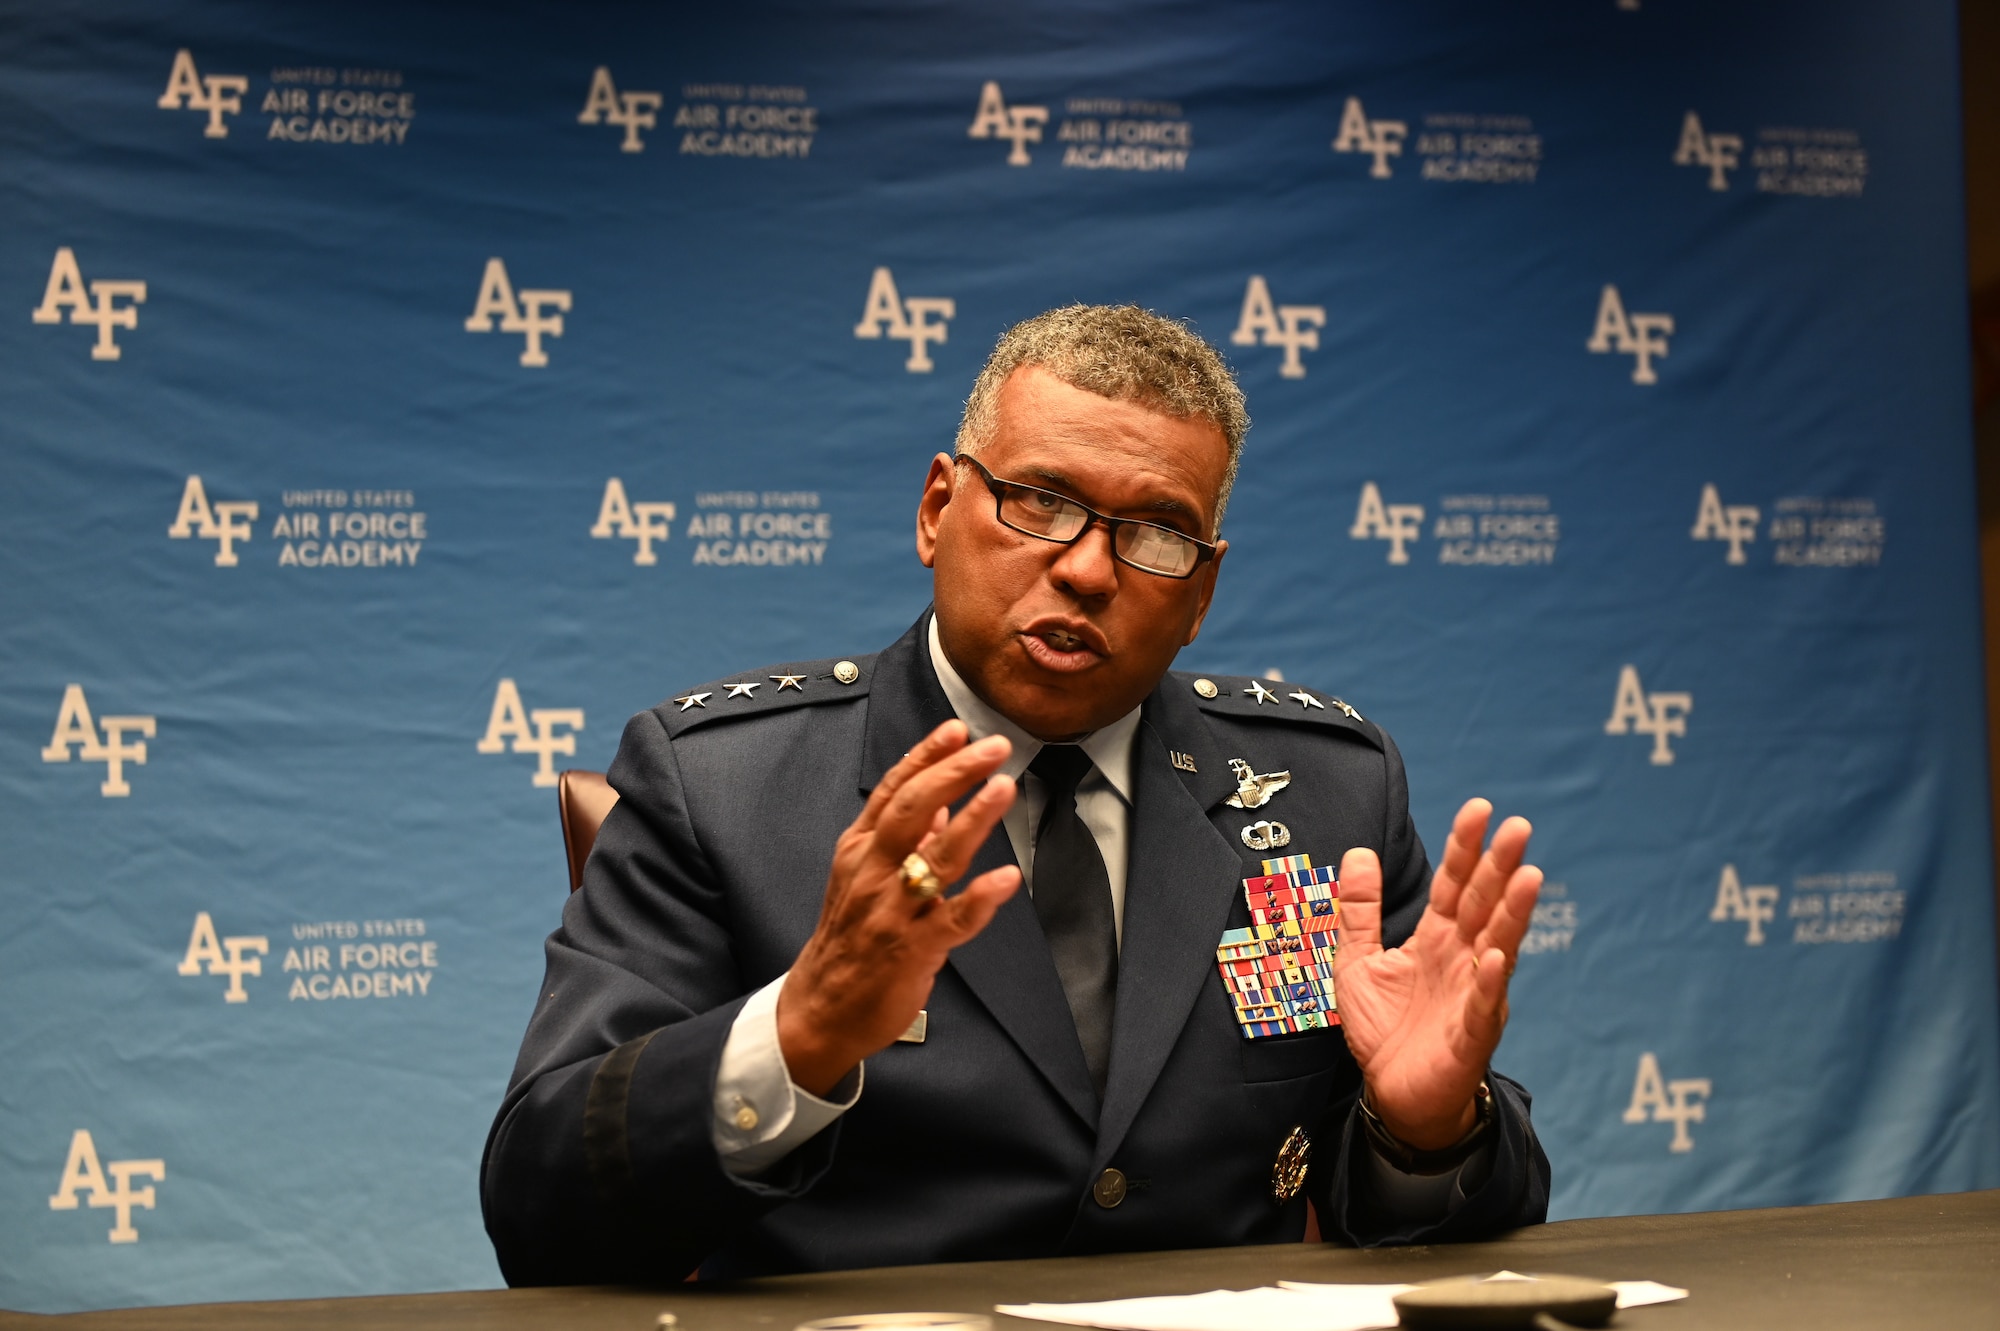 Lt. Gen. Richard Clark, U.S. Air Force Academy superintendent, delivers opening remarks during the virtual National Discussion on Sexual Assault and Sexual Harassment with America’s Colleges, Universities and Service Academies, at the U.S. Air Force Academy, Colo., Sept. 7, 2021. The multi-day, collaborative event enabled more than 200 senior leaders from the Department of Defense and civilian academic institutions to develop partnerships and to share evidence-based best practices to prevent sexual assault and sexual harassment at colleges, universities and service academies. (U.S. Air Force photo by Tech. Sgt. Zach Vaughn)